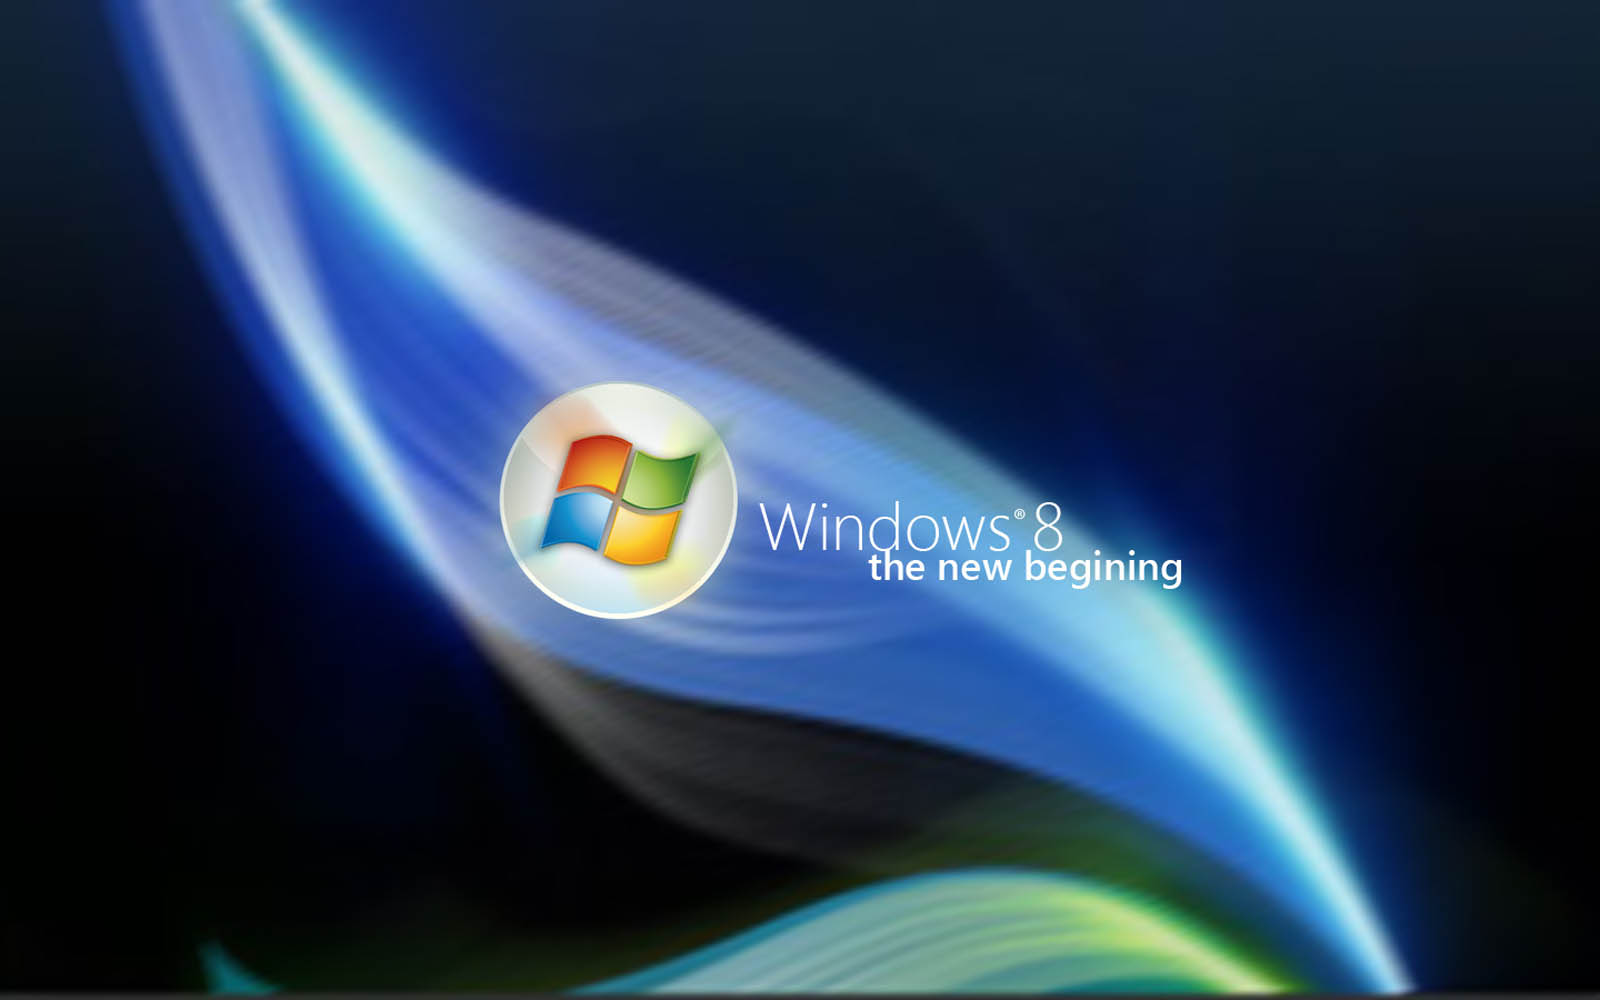 Tag Windows Desktop Wallpaper Background Photos Pictures And